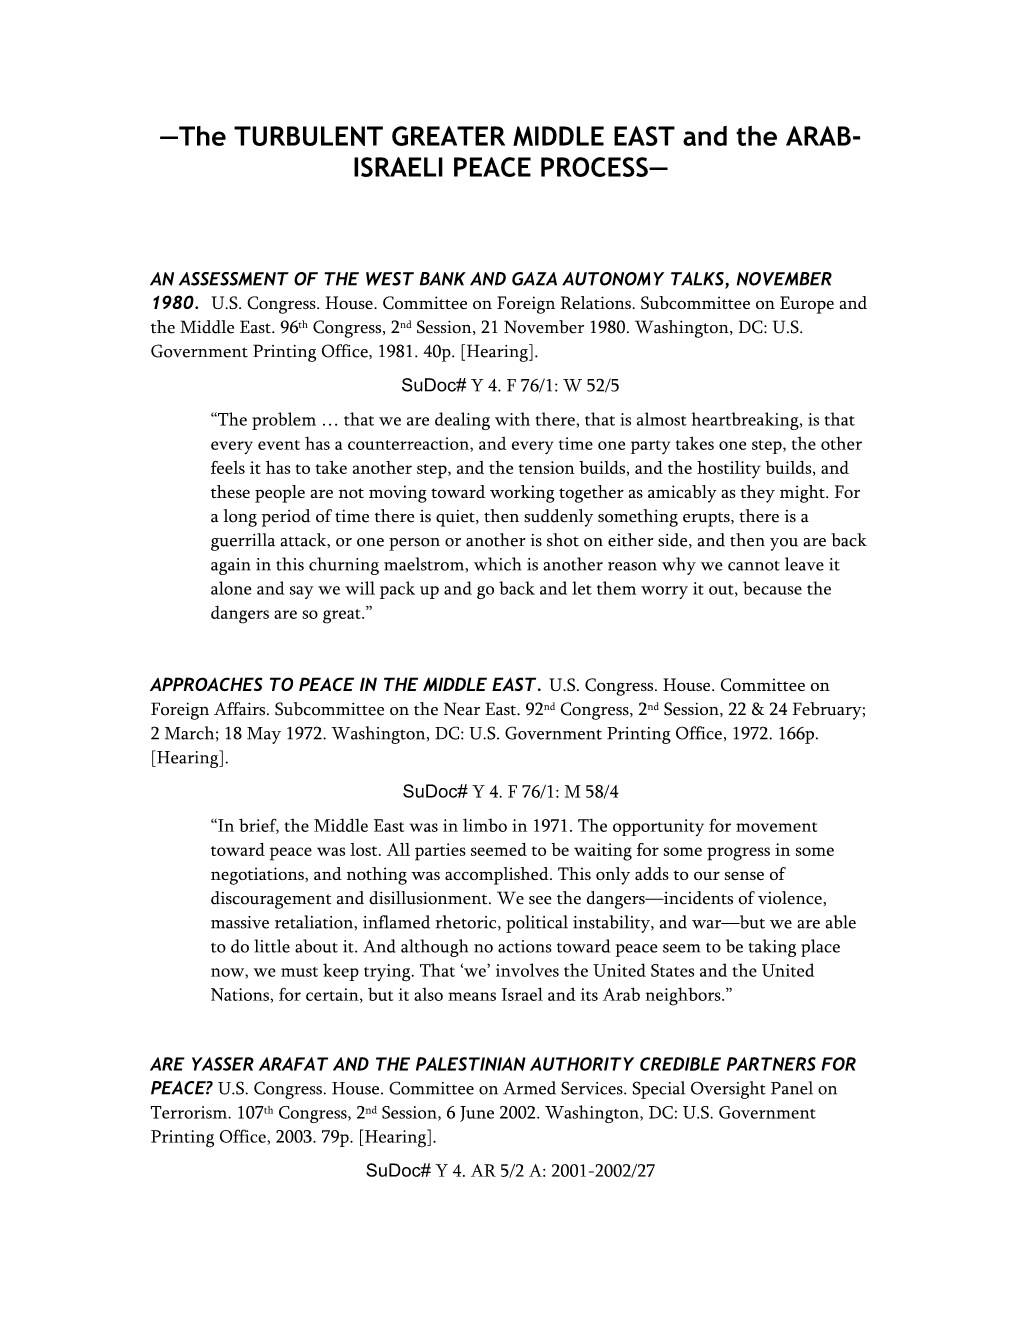 The Turbulent Middle East and the Arab-Israeli Peace Process